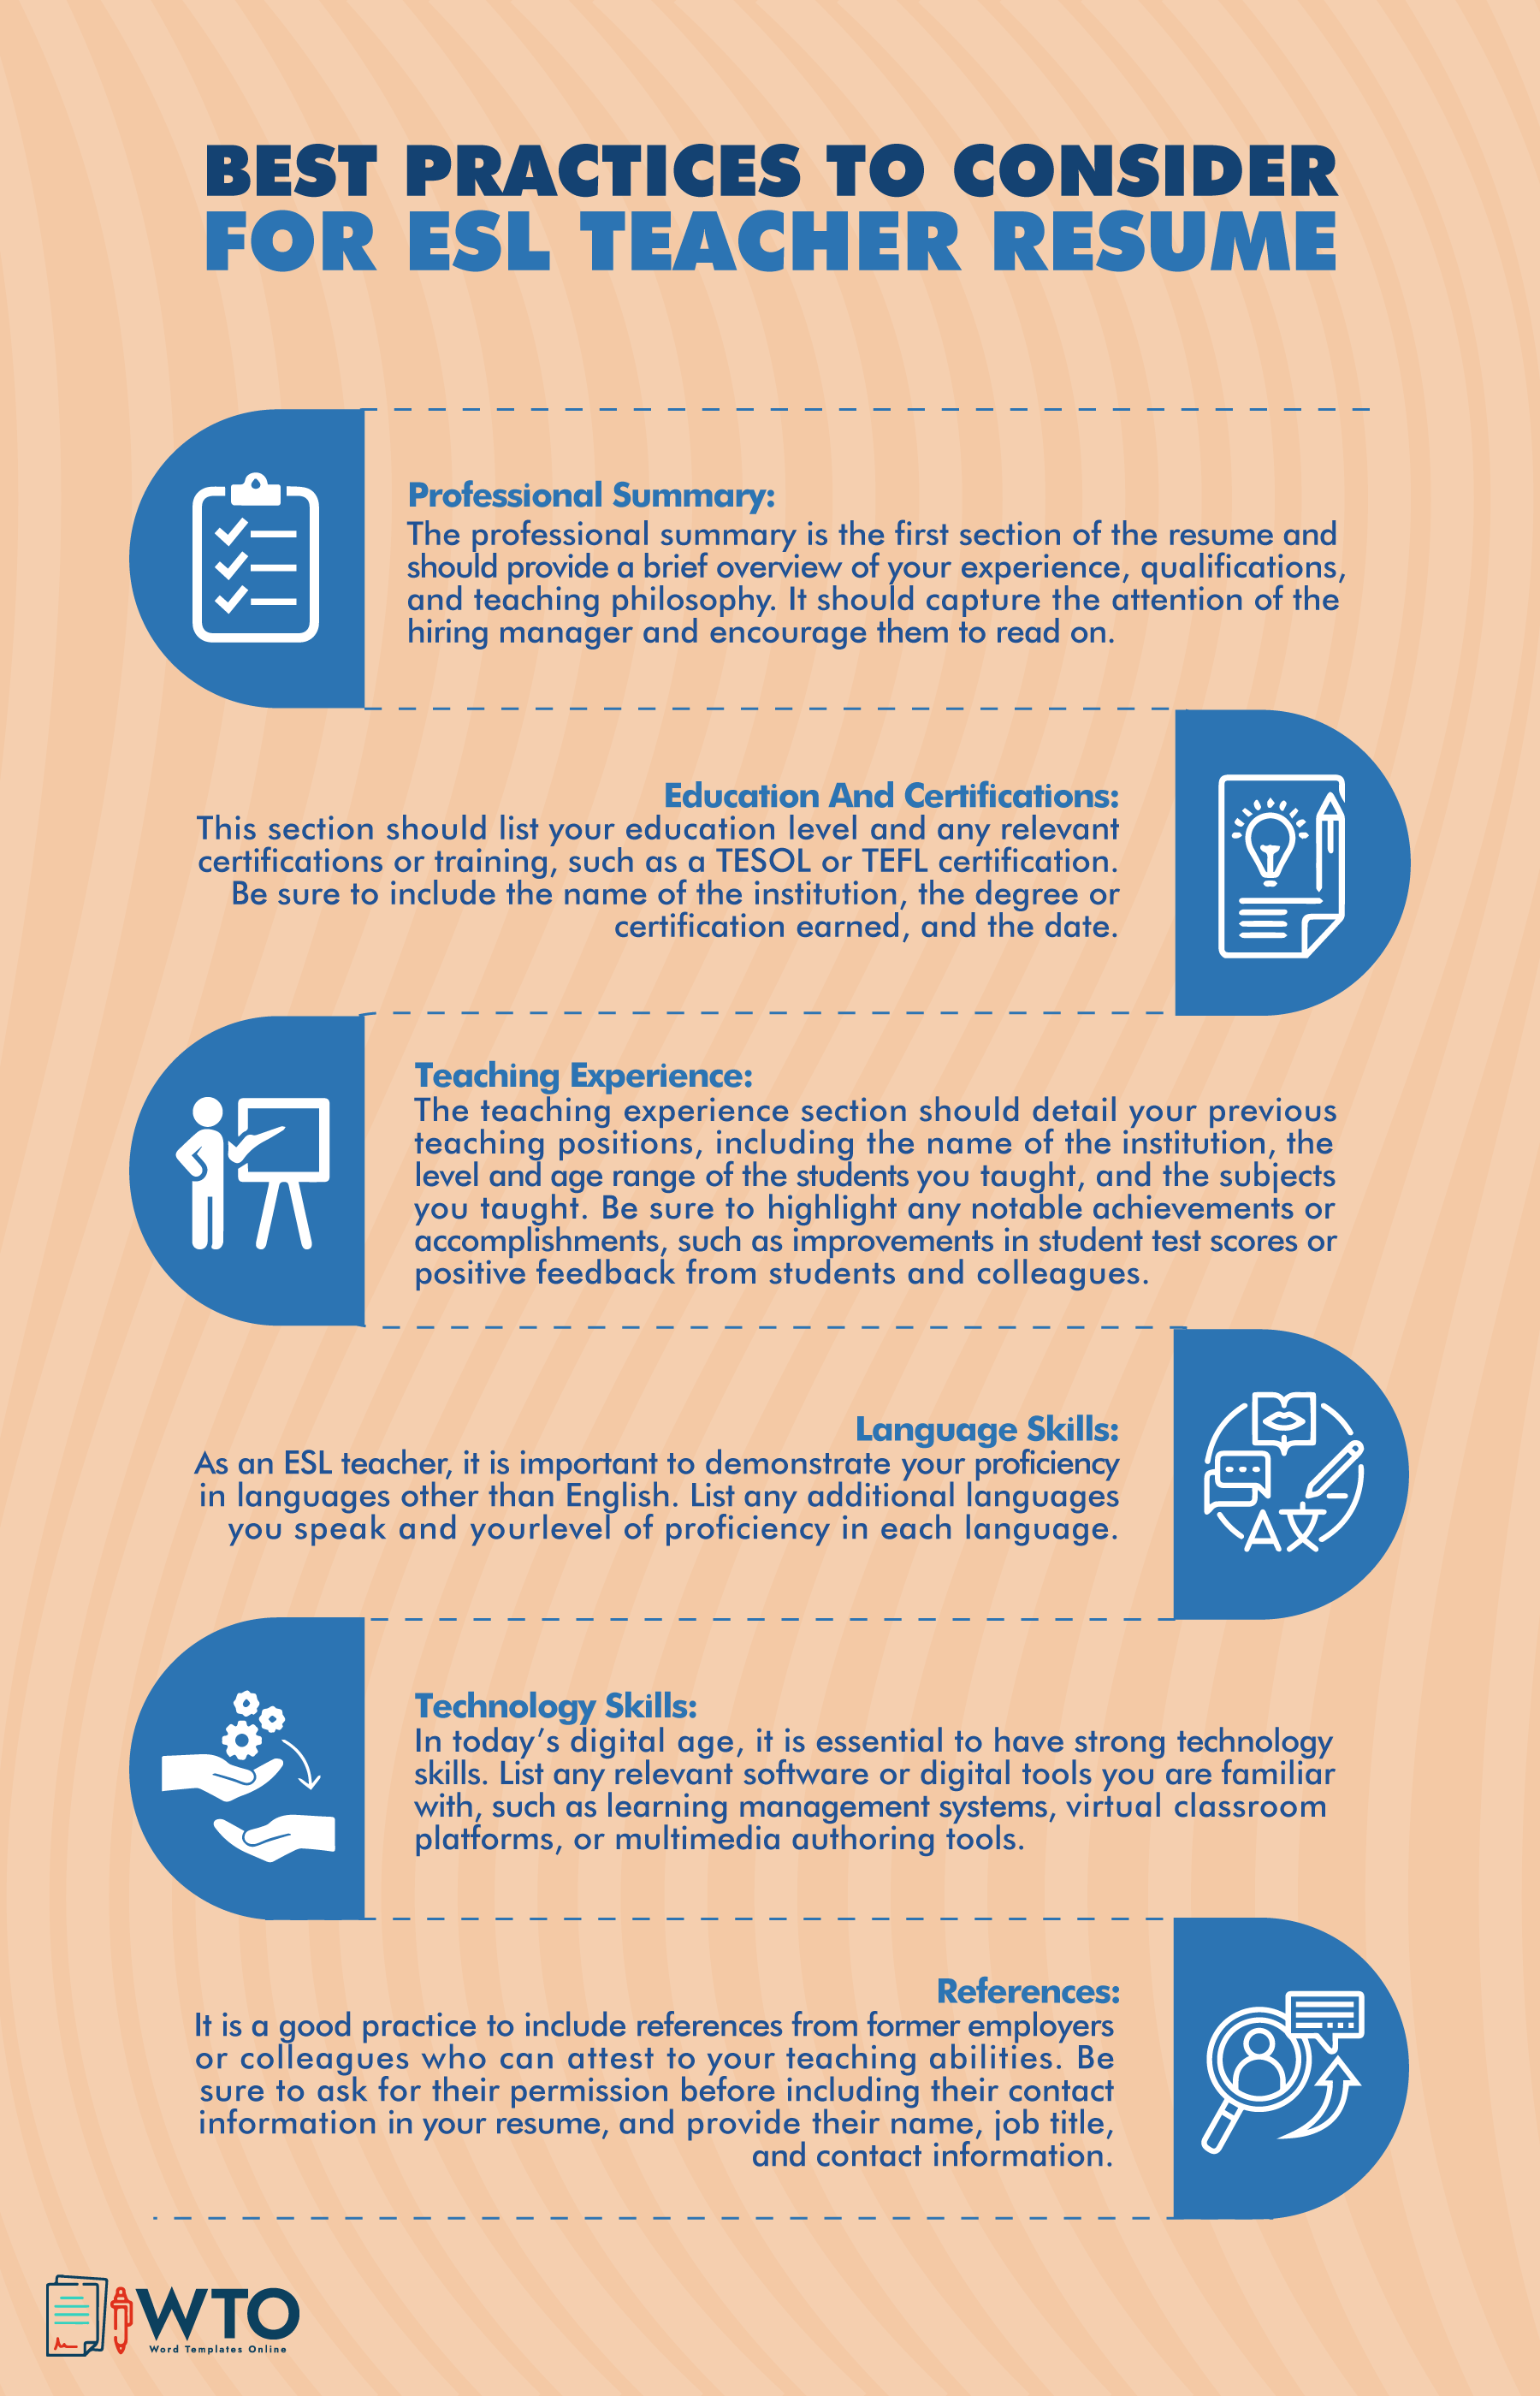 This infographic is about practices for ESL teacher resume.